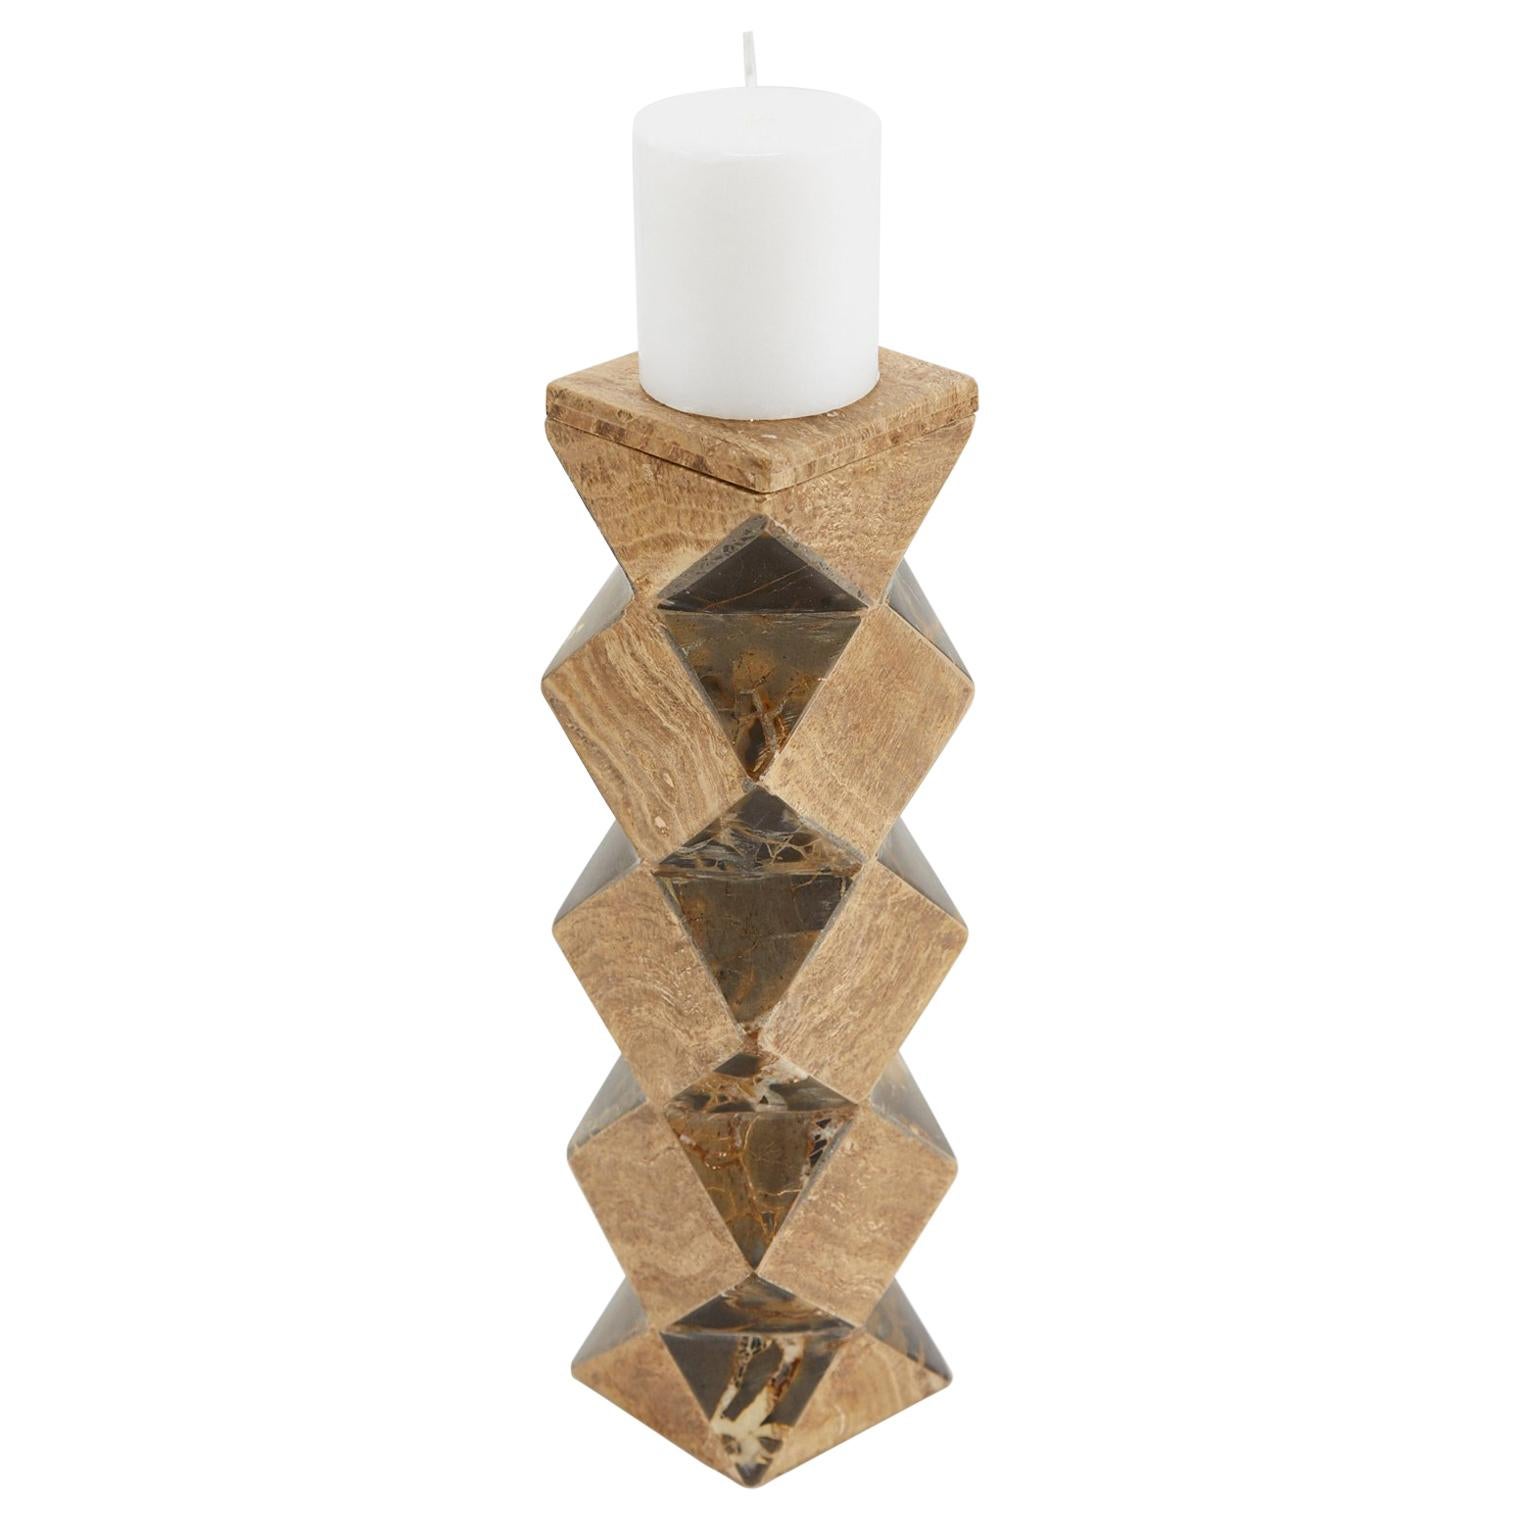 Convertible Faceted Postmodern Tessellated Stone Candlestick or Vase, 1990s im Angebot